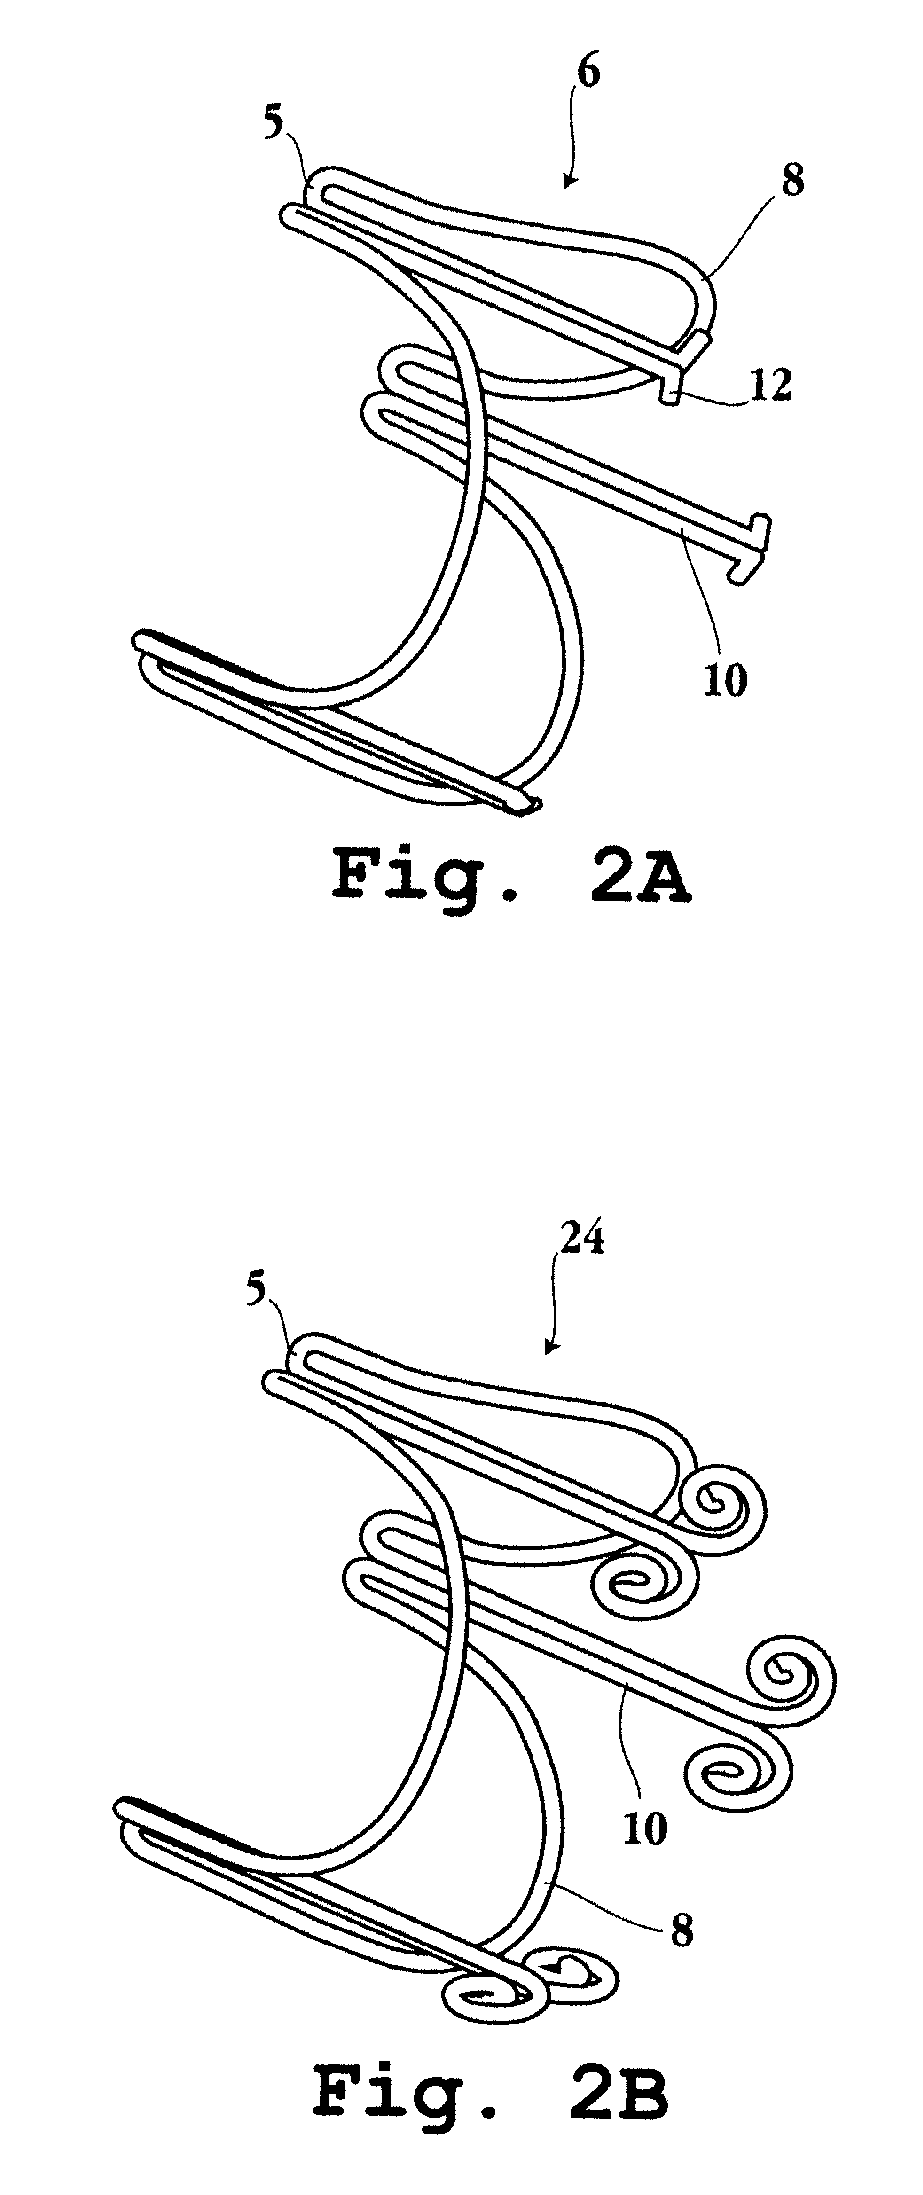 Methods for Delivery of a Sutureless Pulmonary or Mitral Valve